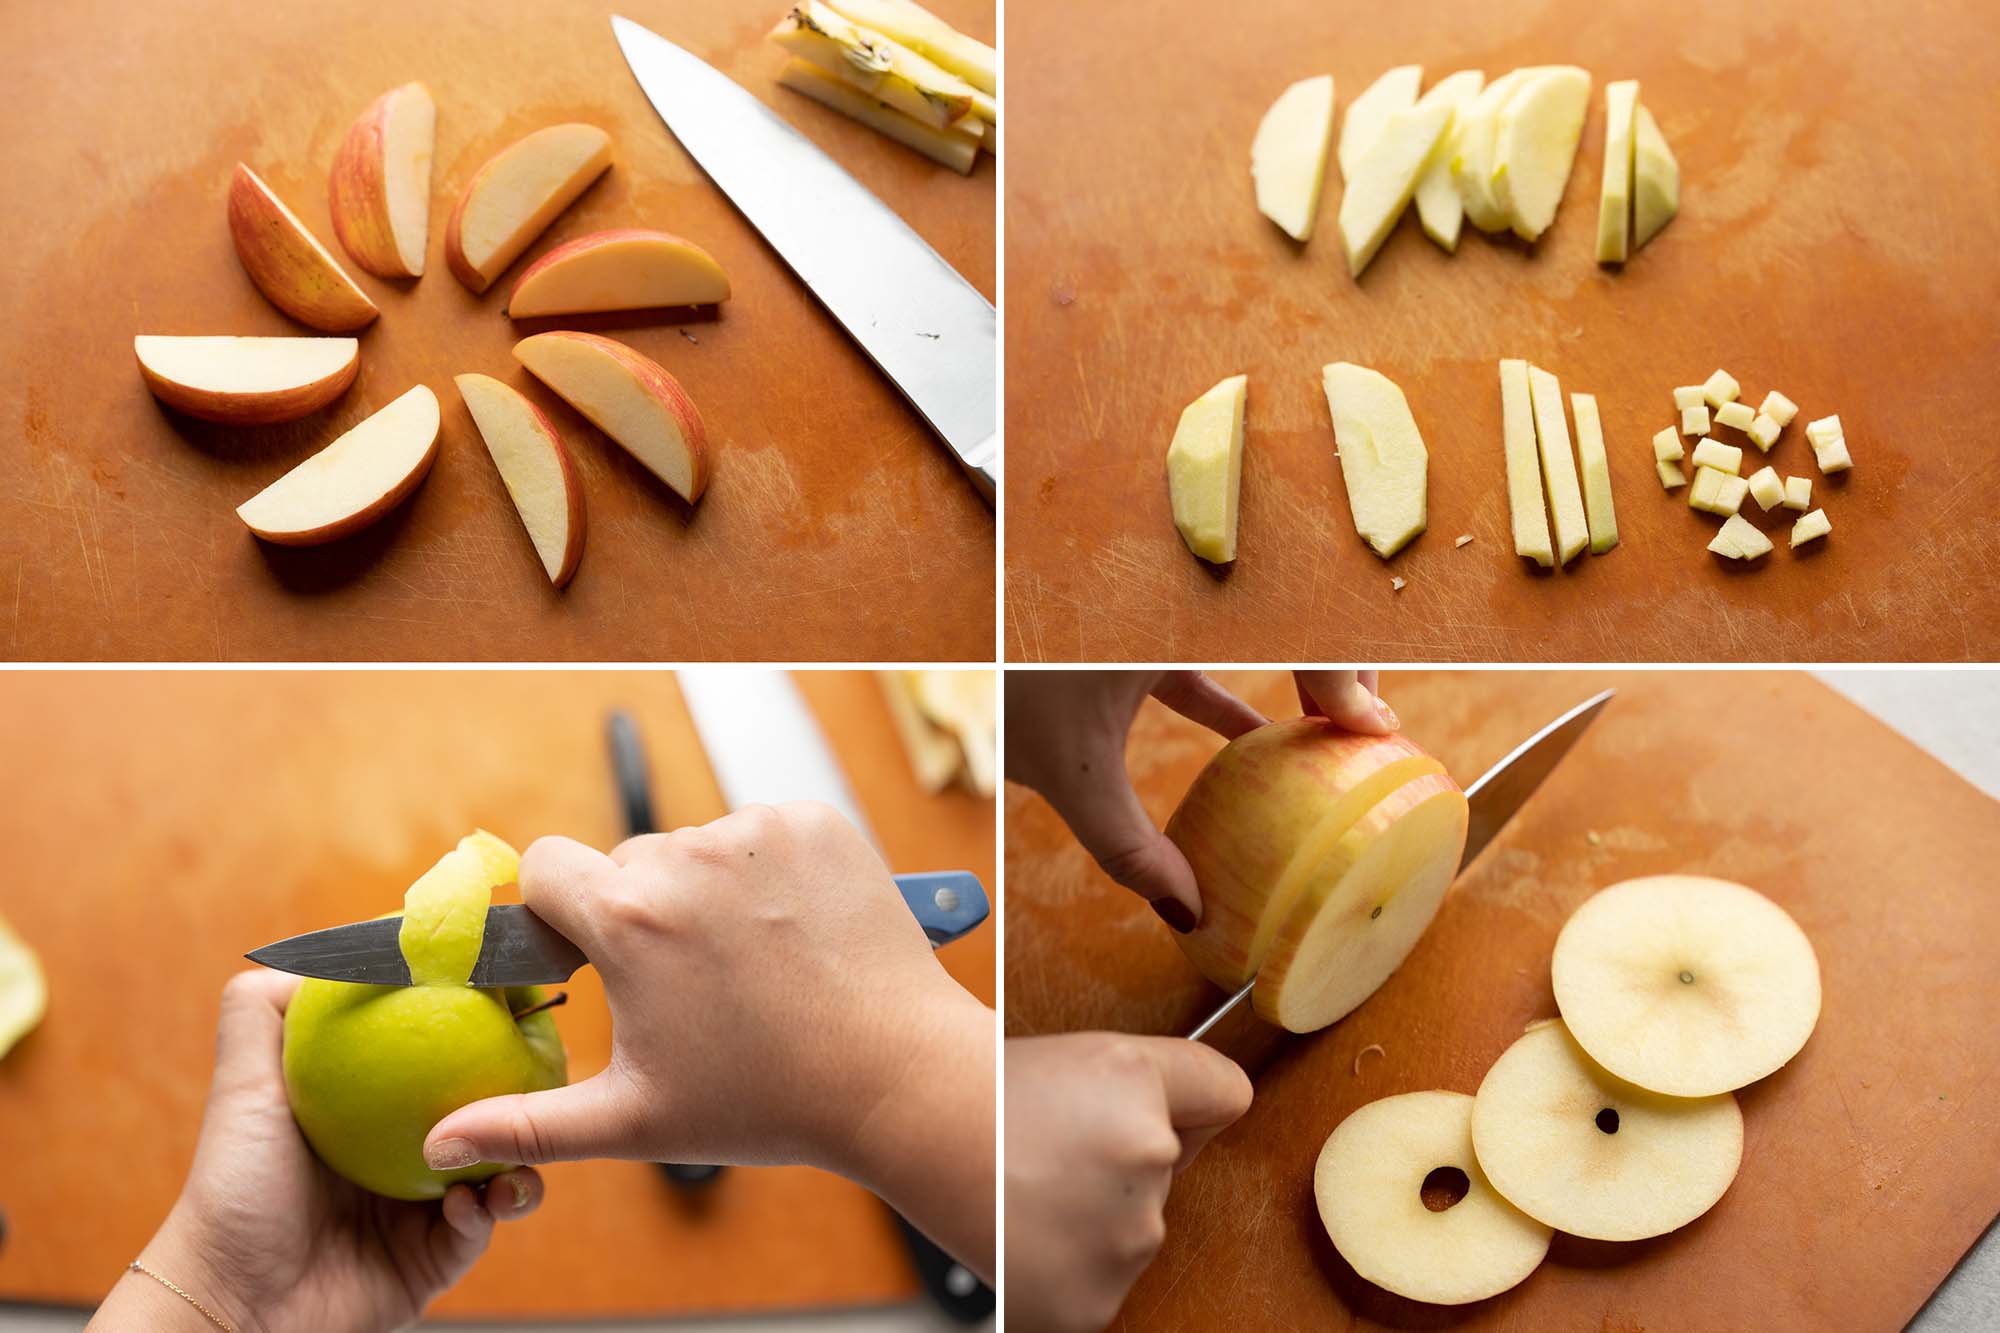 How to Slice Apples